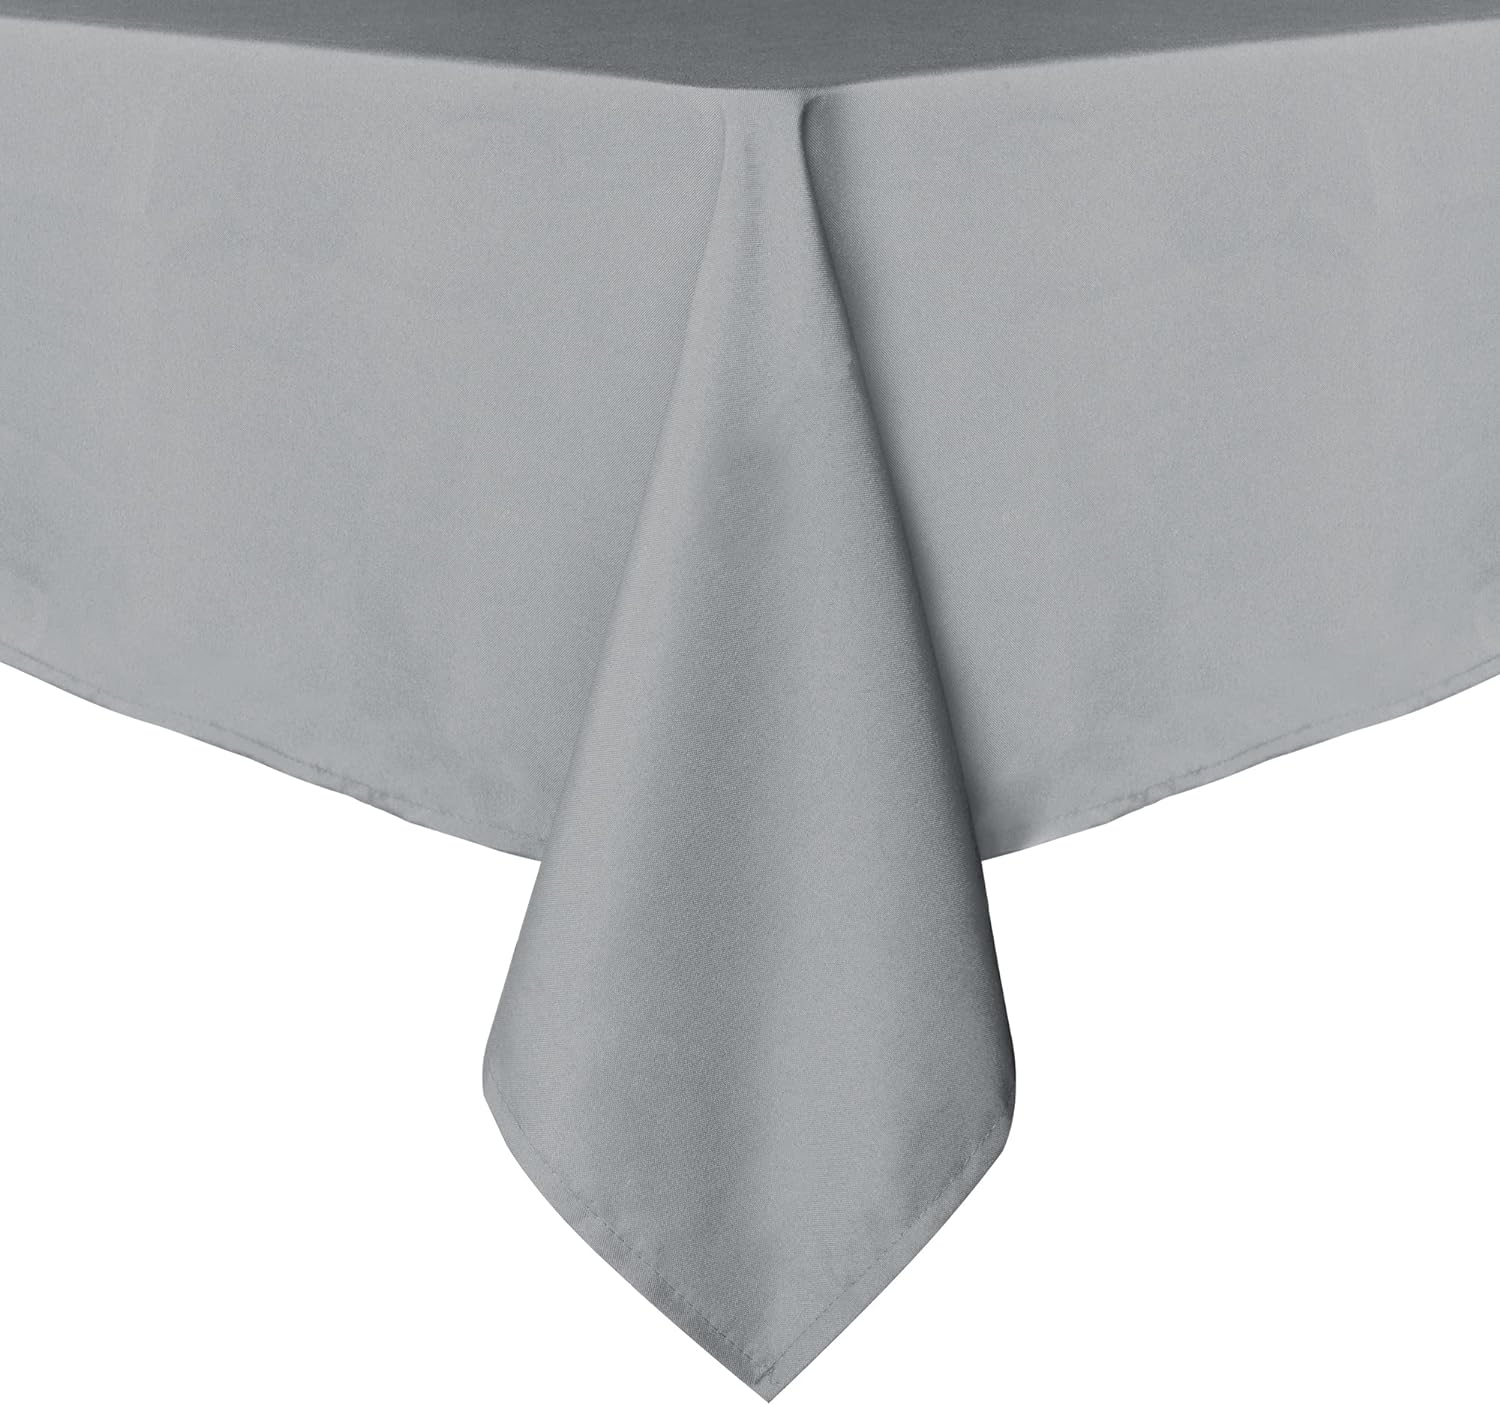 sancua Rectangle Tablecloth - 60 x 84 Inch - Stain and Wrinkle Resistant Washable Polyester Table Cloth, Decorative Fabric Table Cover for Dining Table, Buffet Parties and Camping, Silver Grey